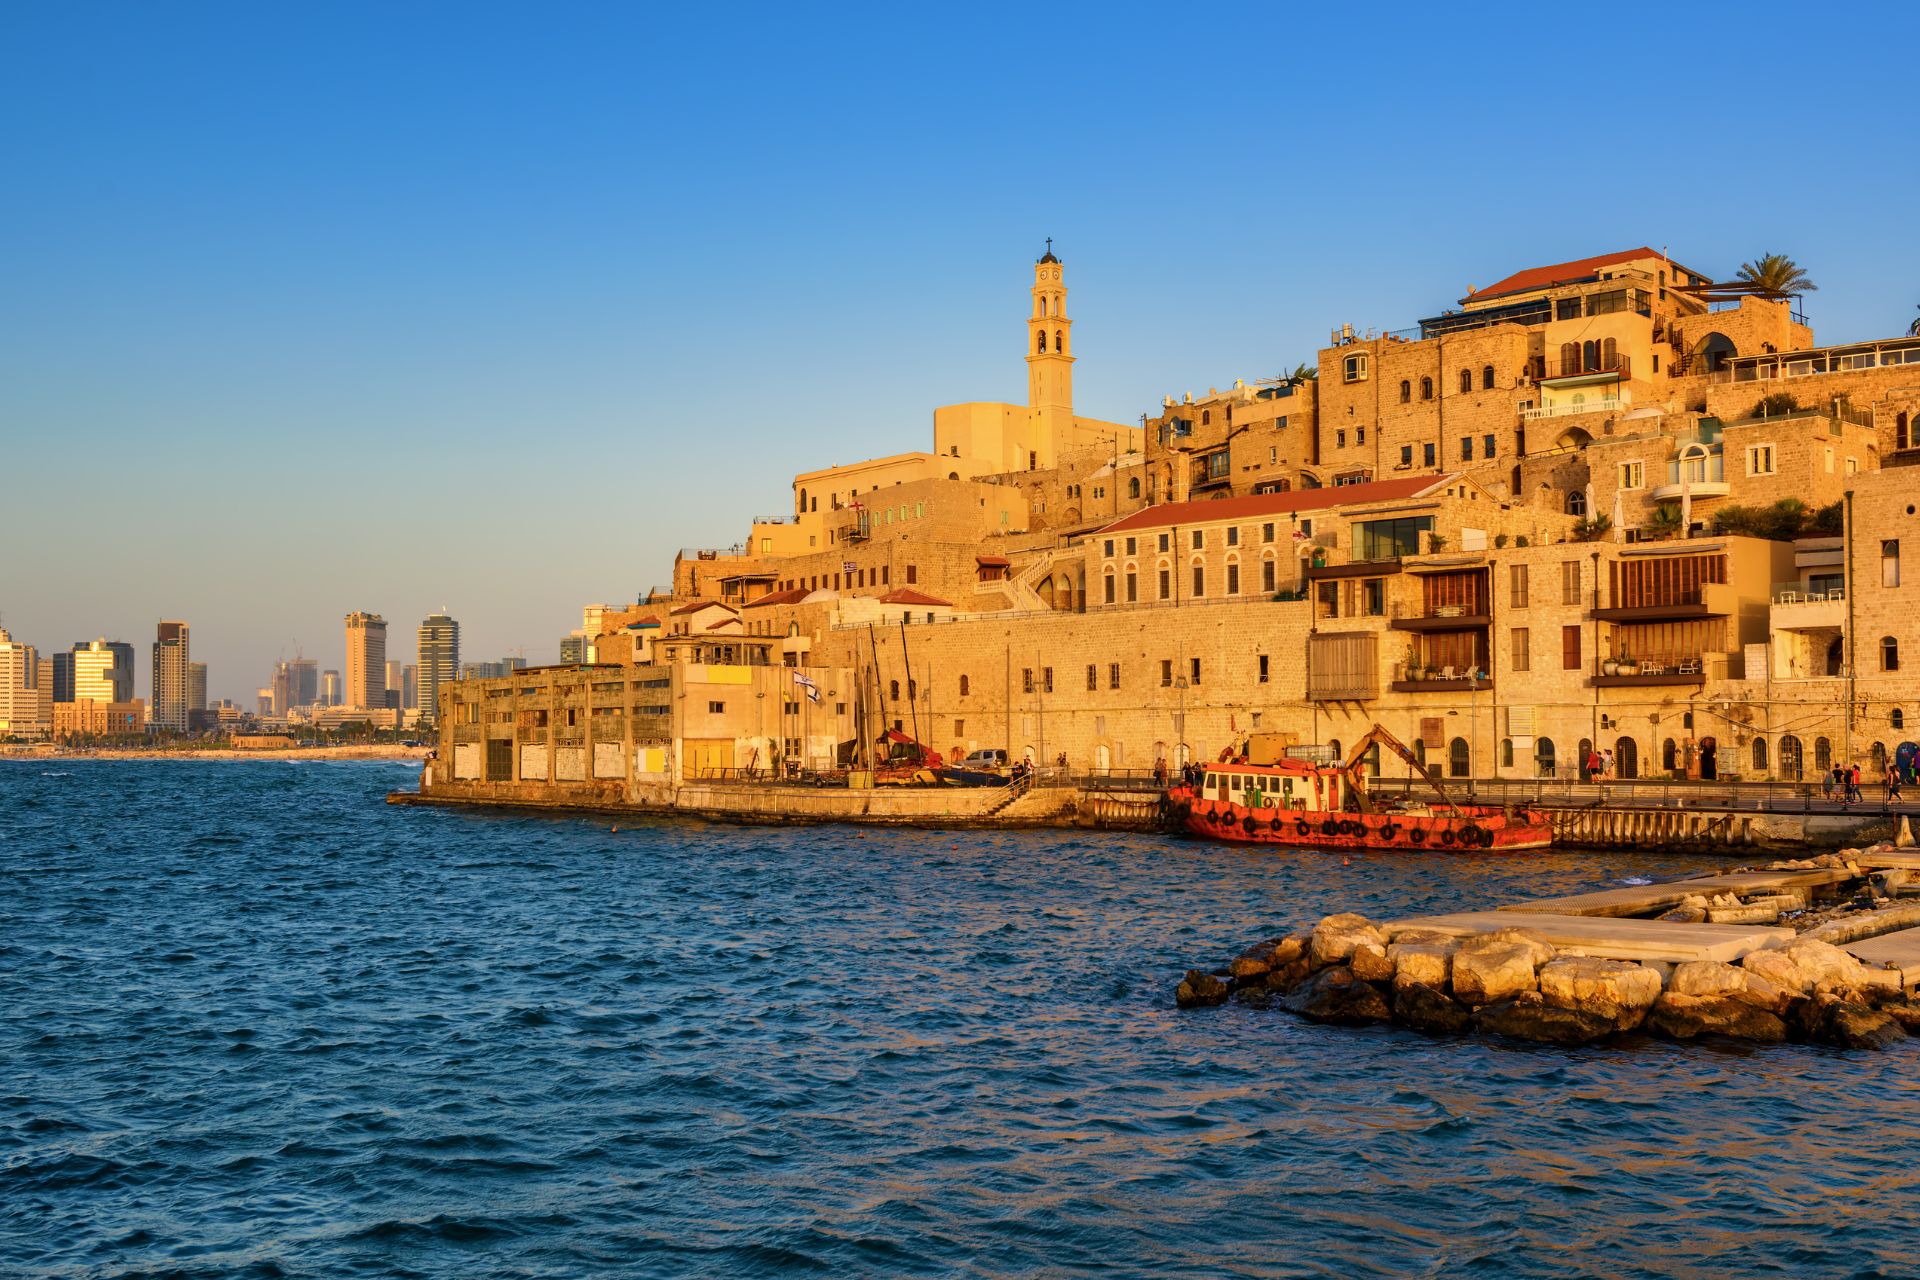 Jaffa Old Town and Tel Aviv skyline, Israel ©Getty Images